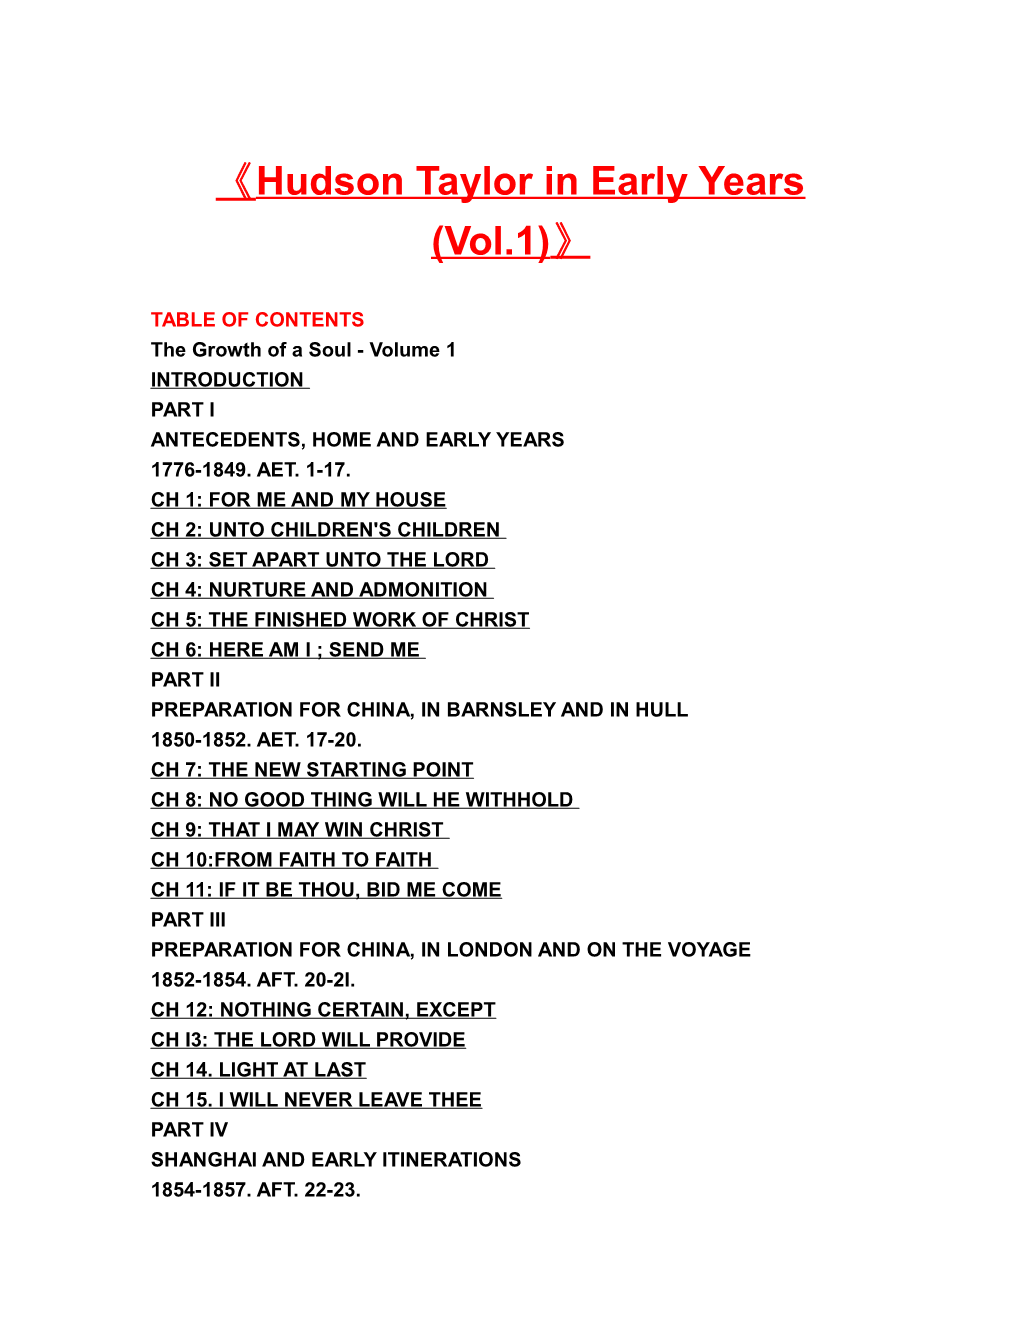 Hudson Taylor in Early Years (Vol.1)